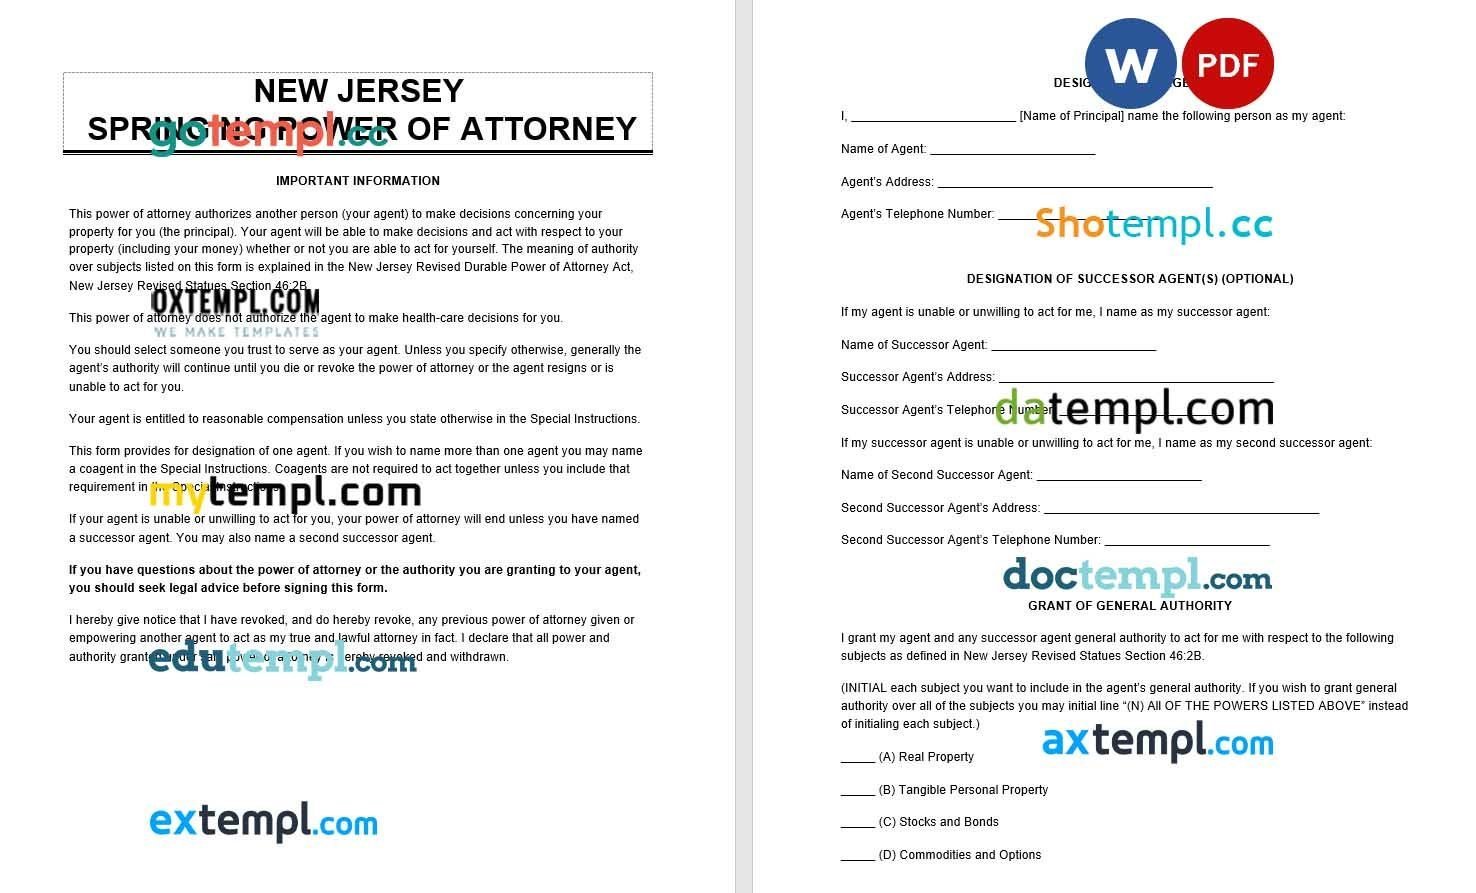 New Jersey Springing Power of Attorney example, fully editable